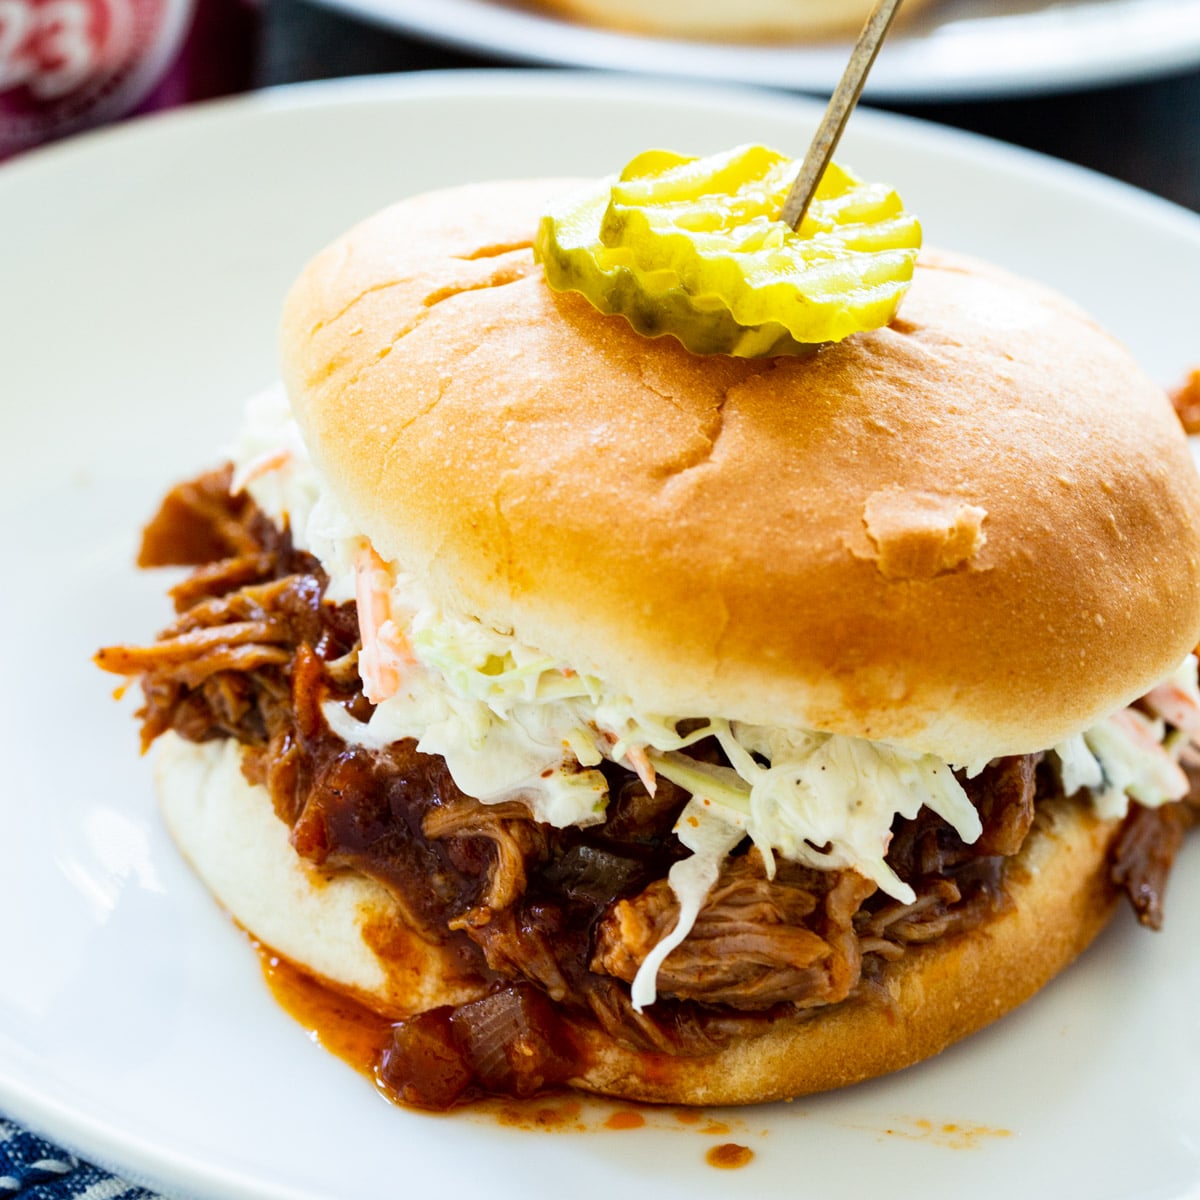 Slow Cooker Dr. Pepper Pulled Pork on a bun with coleslaw.